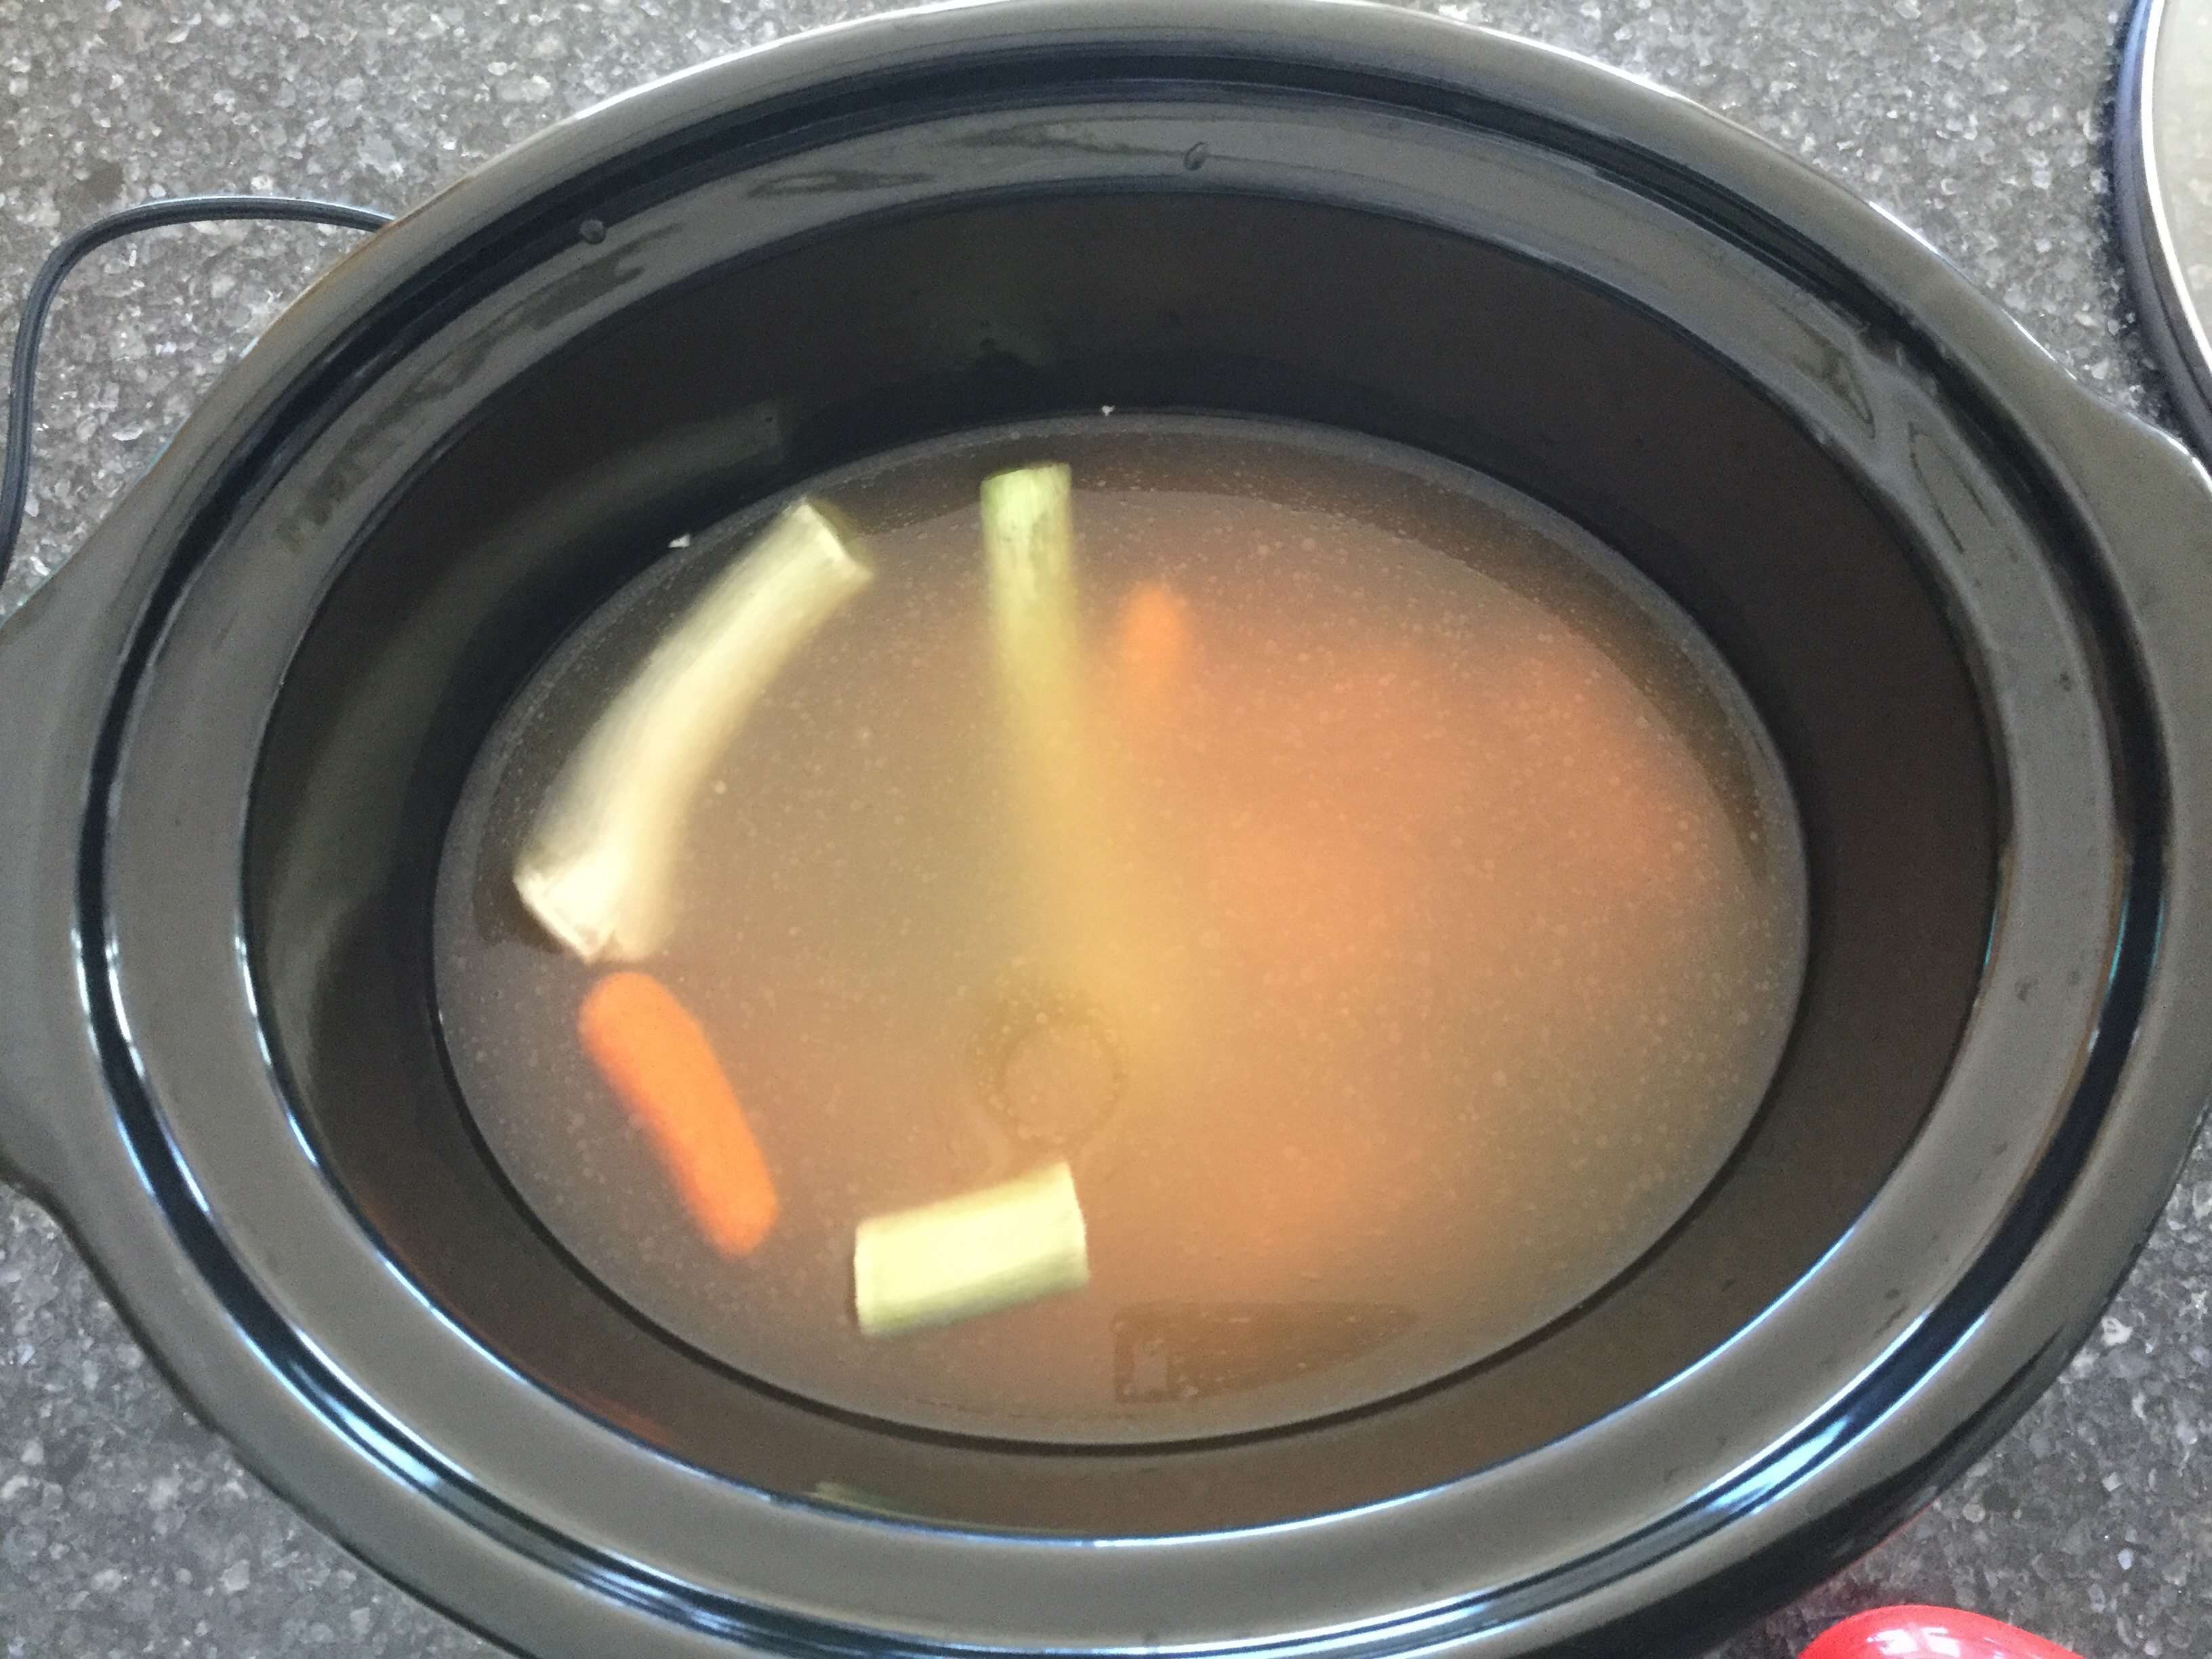 Place chicken broth, leeks, & carrots into slow cooker.